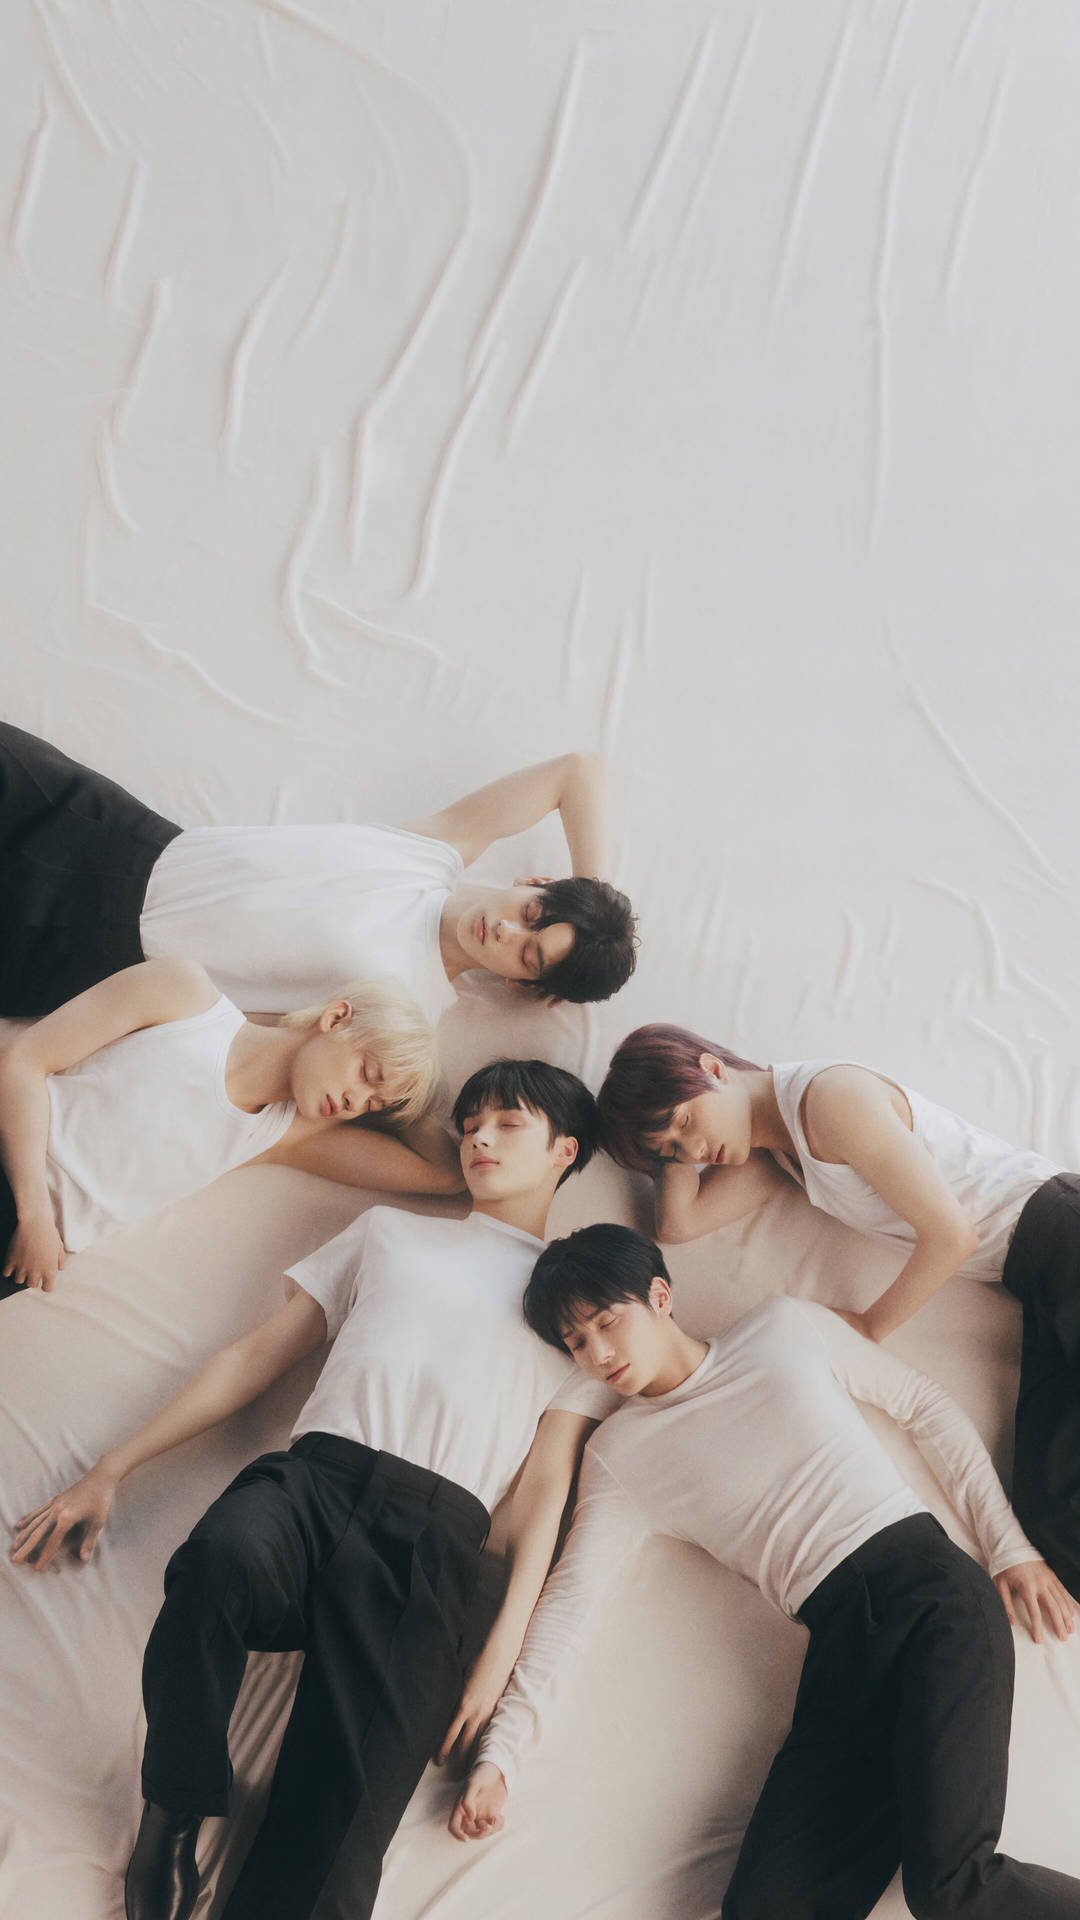 Txt Sleeping On A Bed Wallpaper